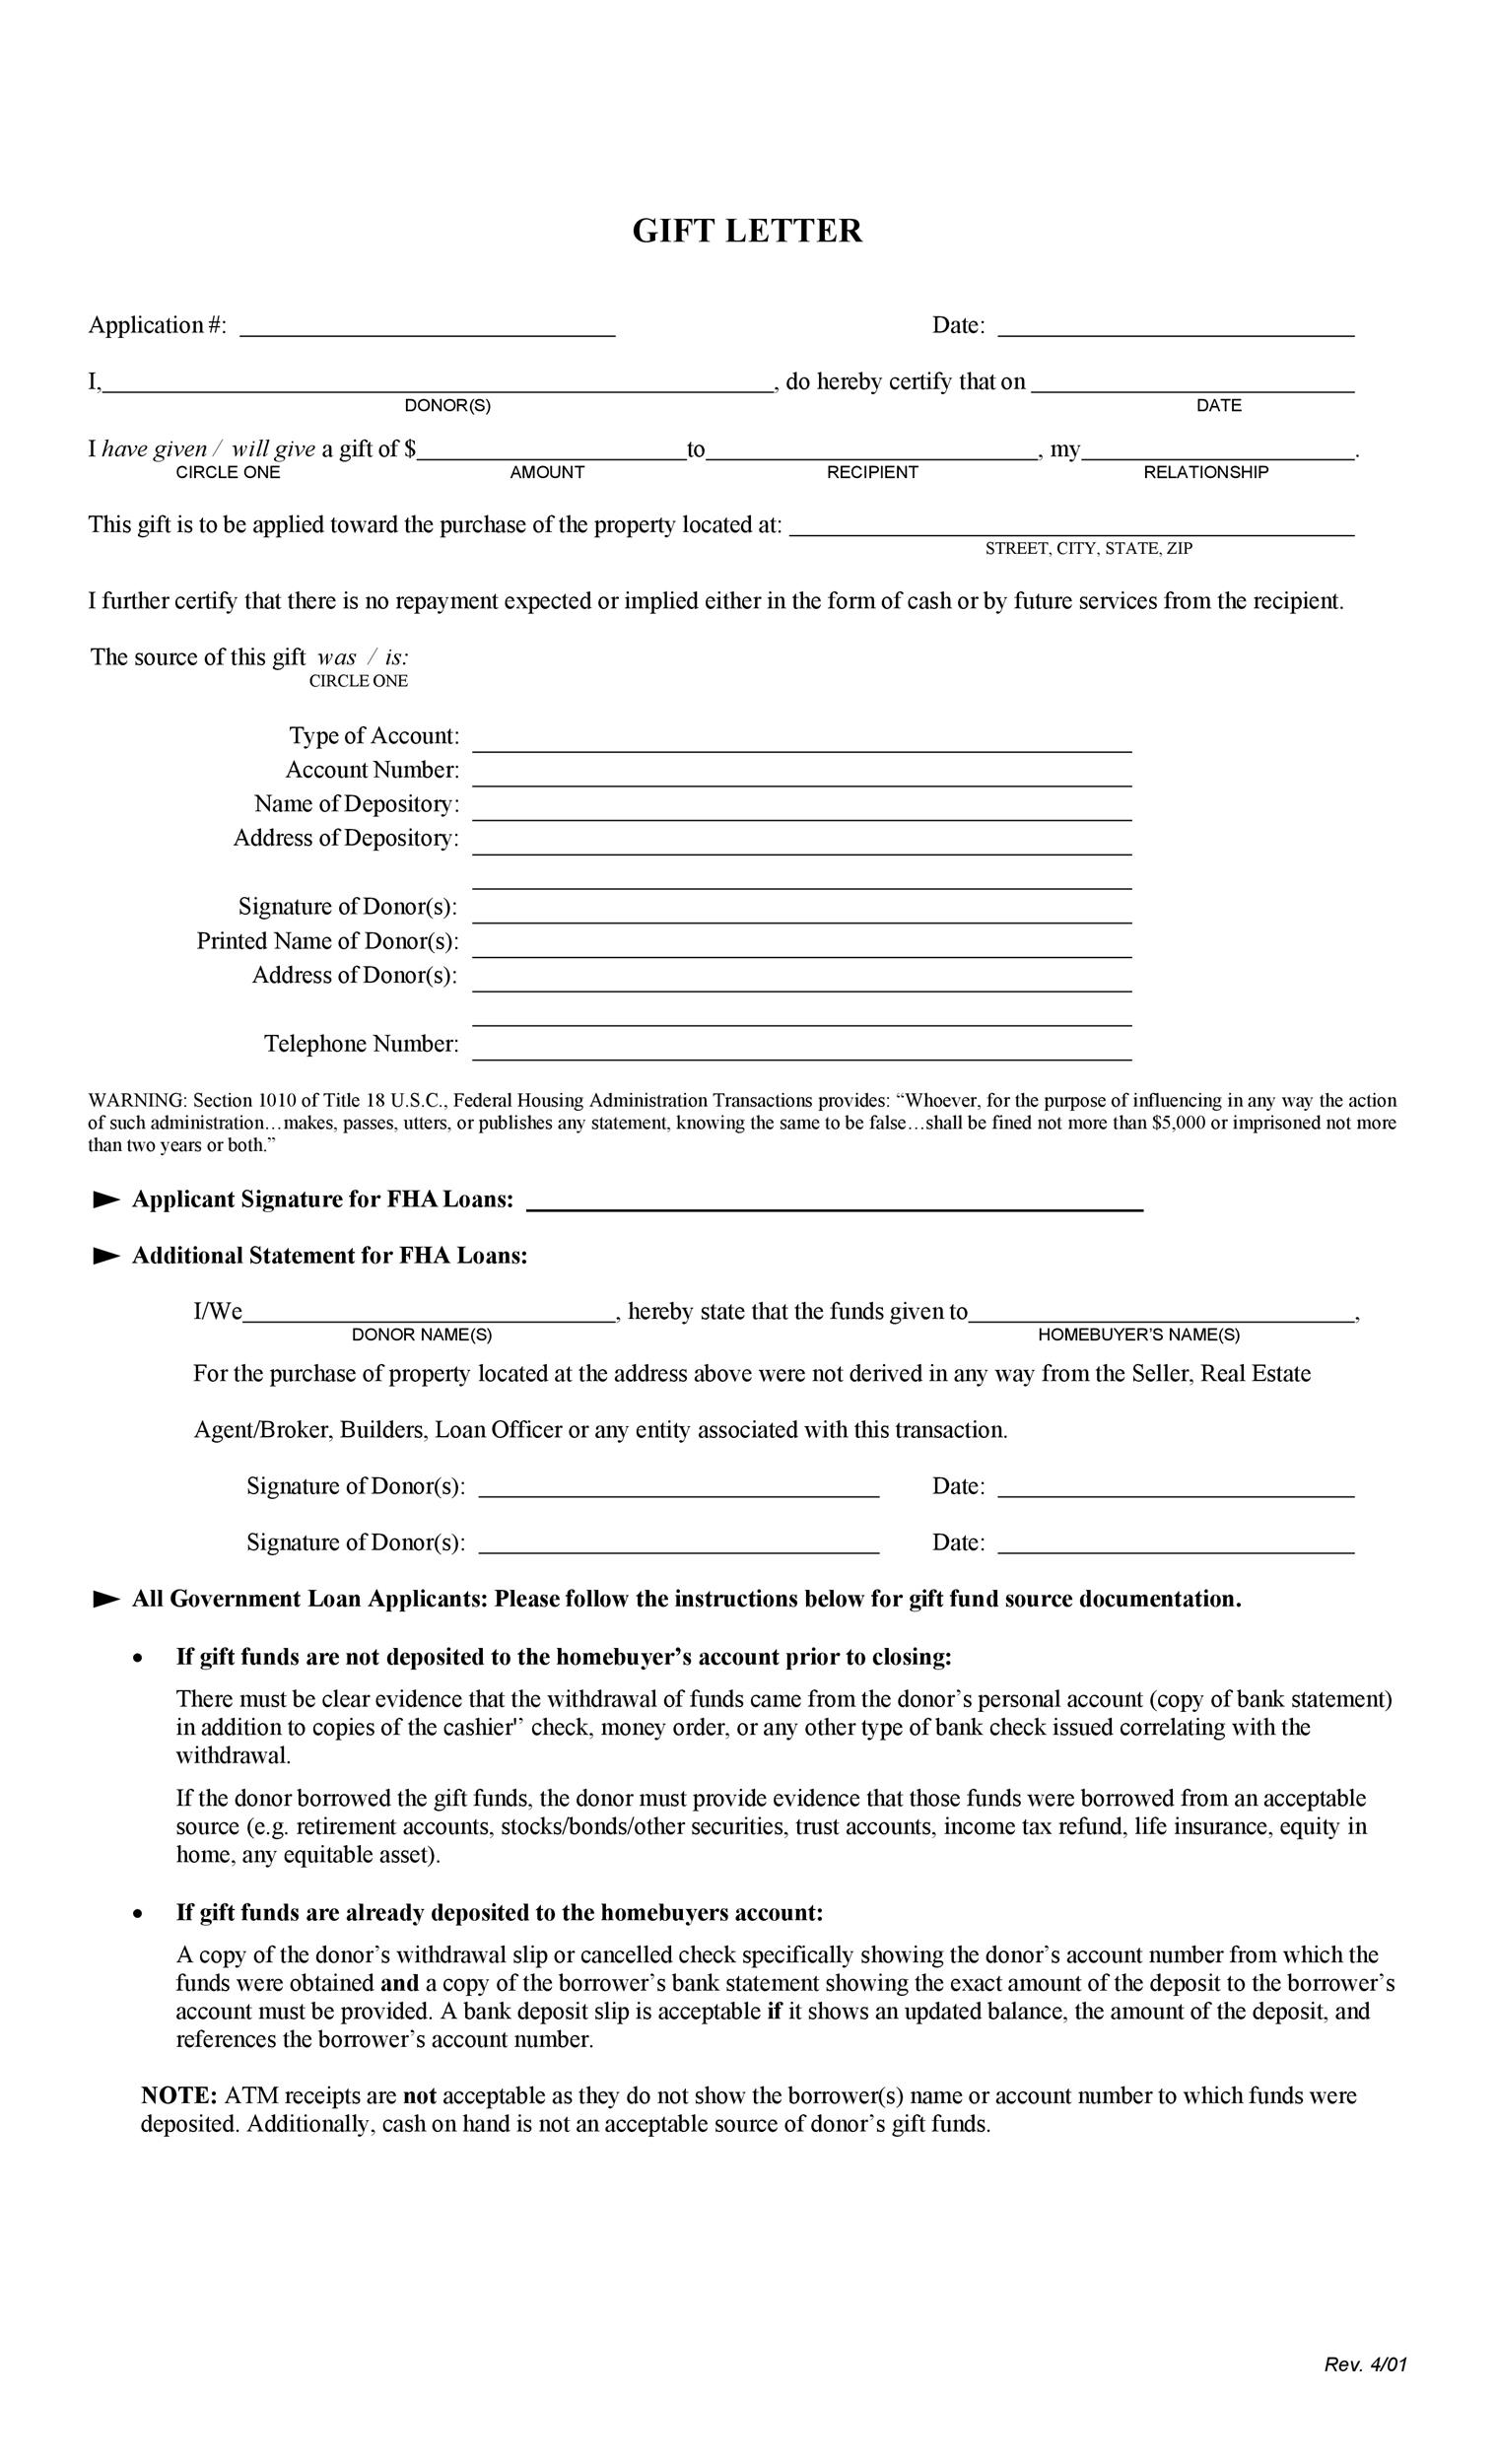 Mortgage Protection Letter Template from templatelab.com